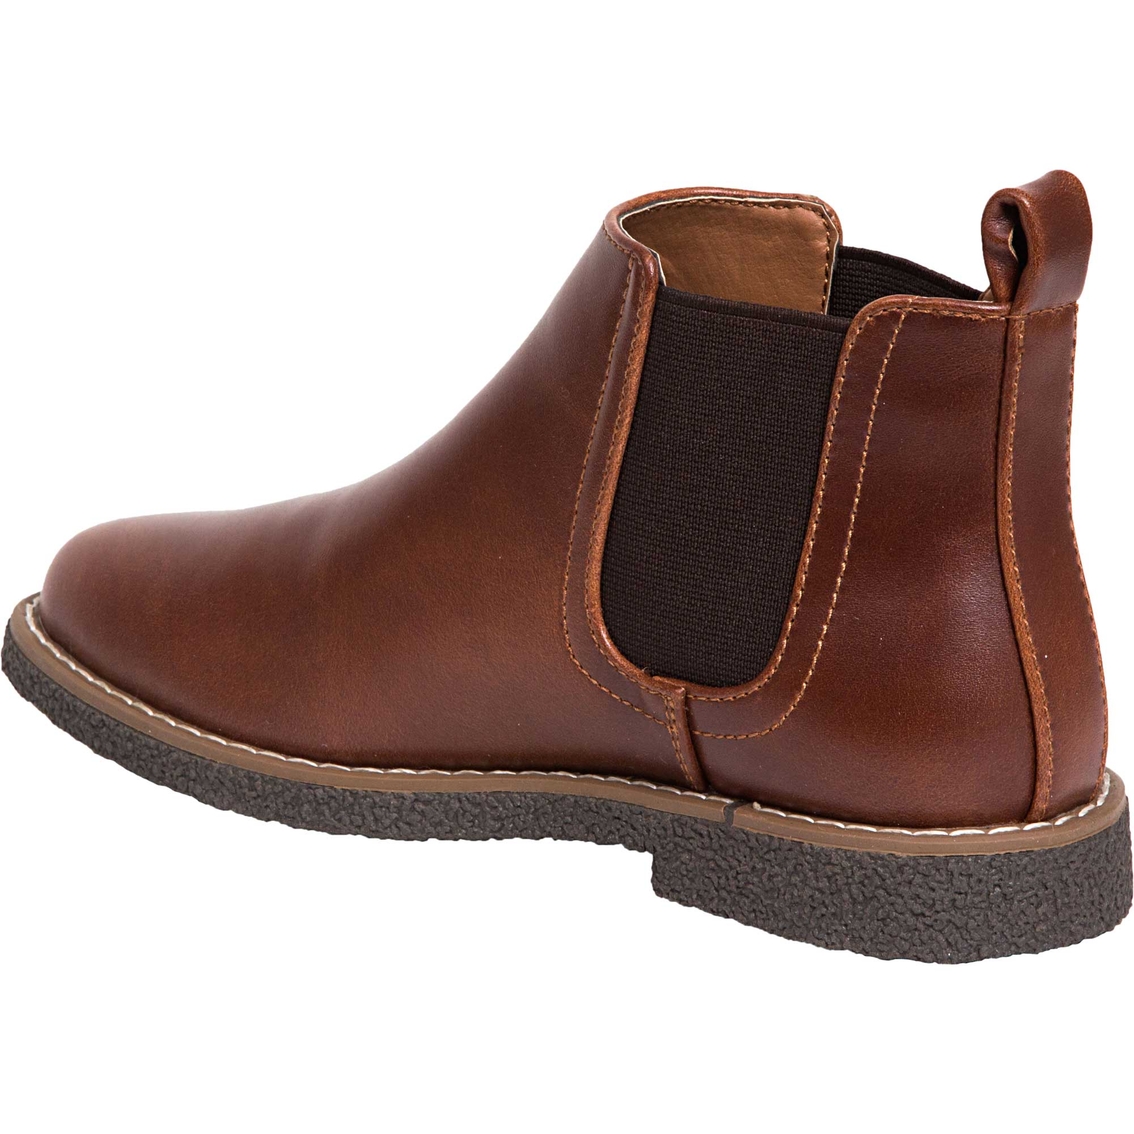 Deer Stags Boys Zane Dress Boots - Image 4 of 6